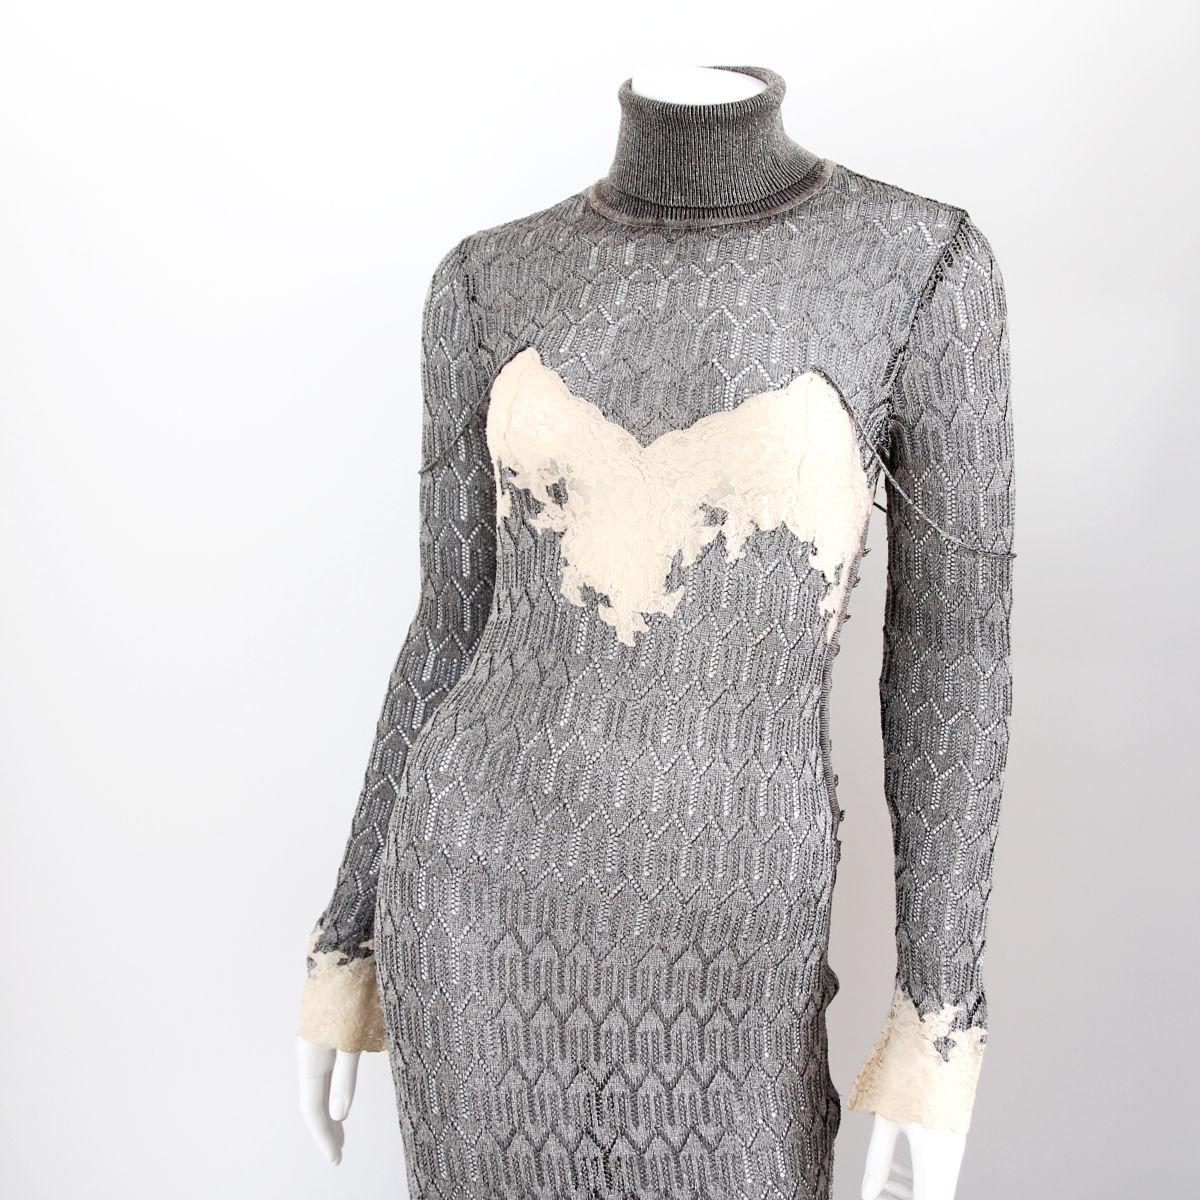 CHRISTIAN DIOR

1998. Silver-coloured dress with cream lace trim by Christian Dior by John Galliano.

This elegant dress is an extremely rare collector's item and one of Dior's must-have pieces. Known from advertisements and runway. 
Buy Now Or Cry